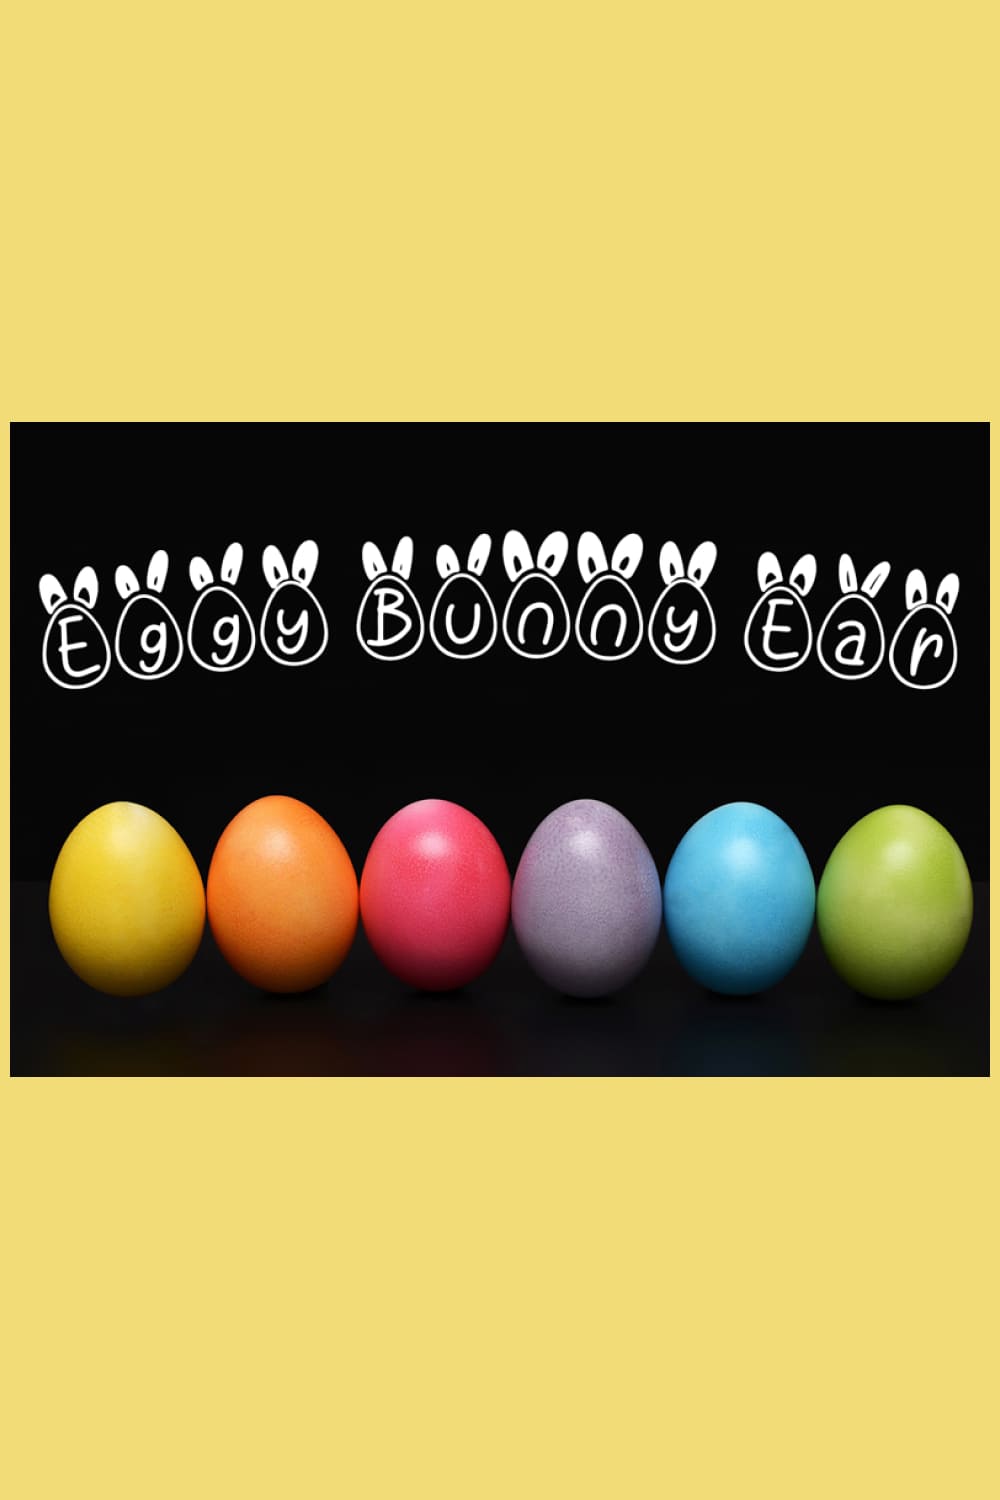 Letters in eggs with colorful eggs on black background.